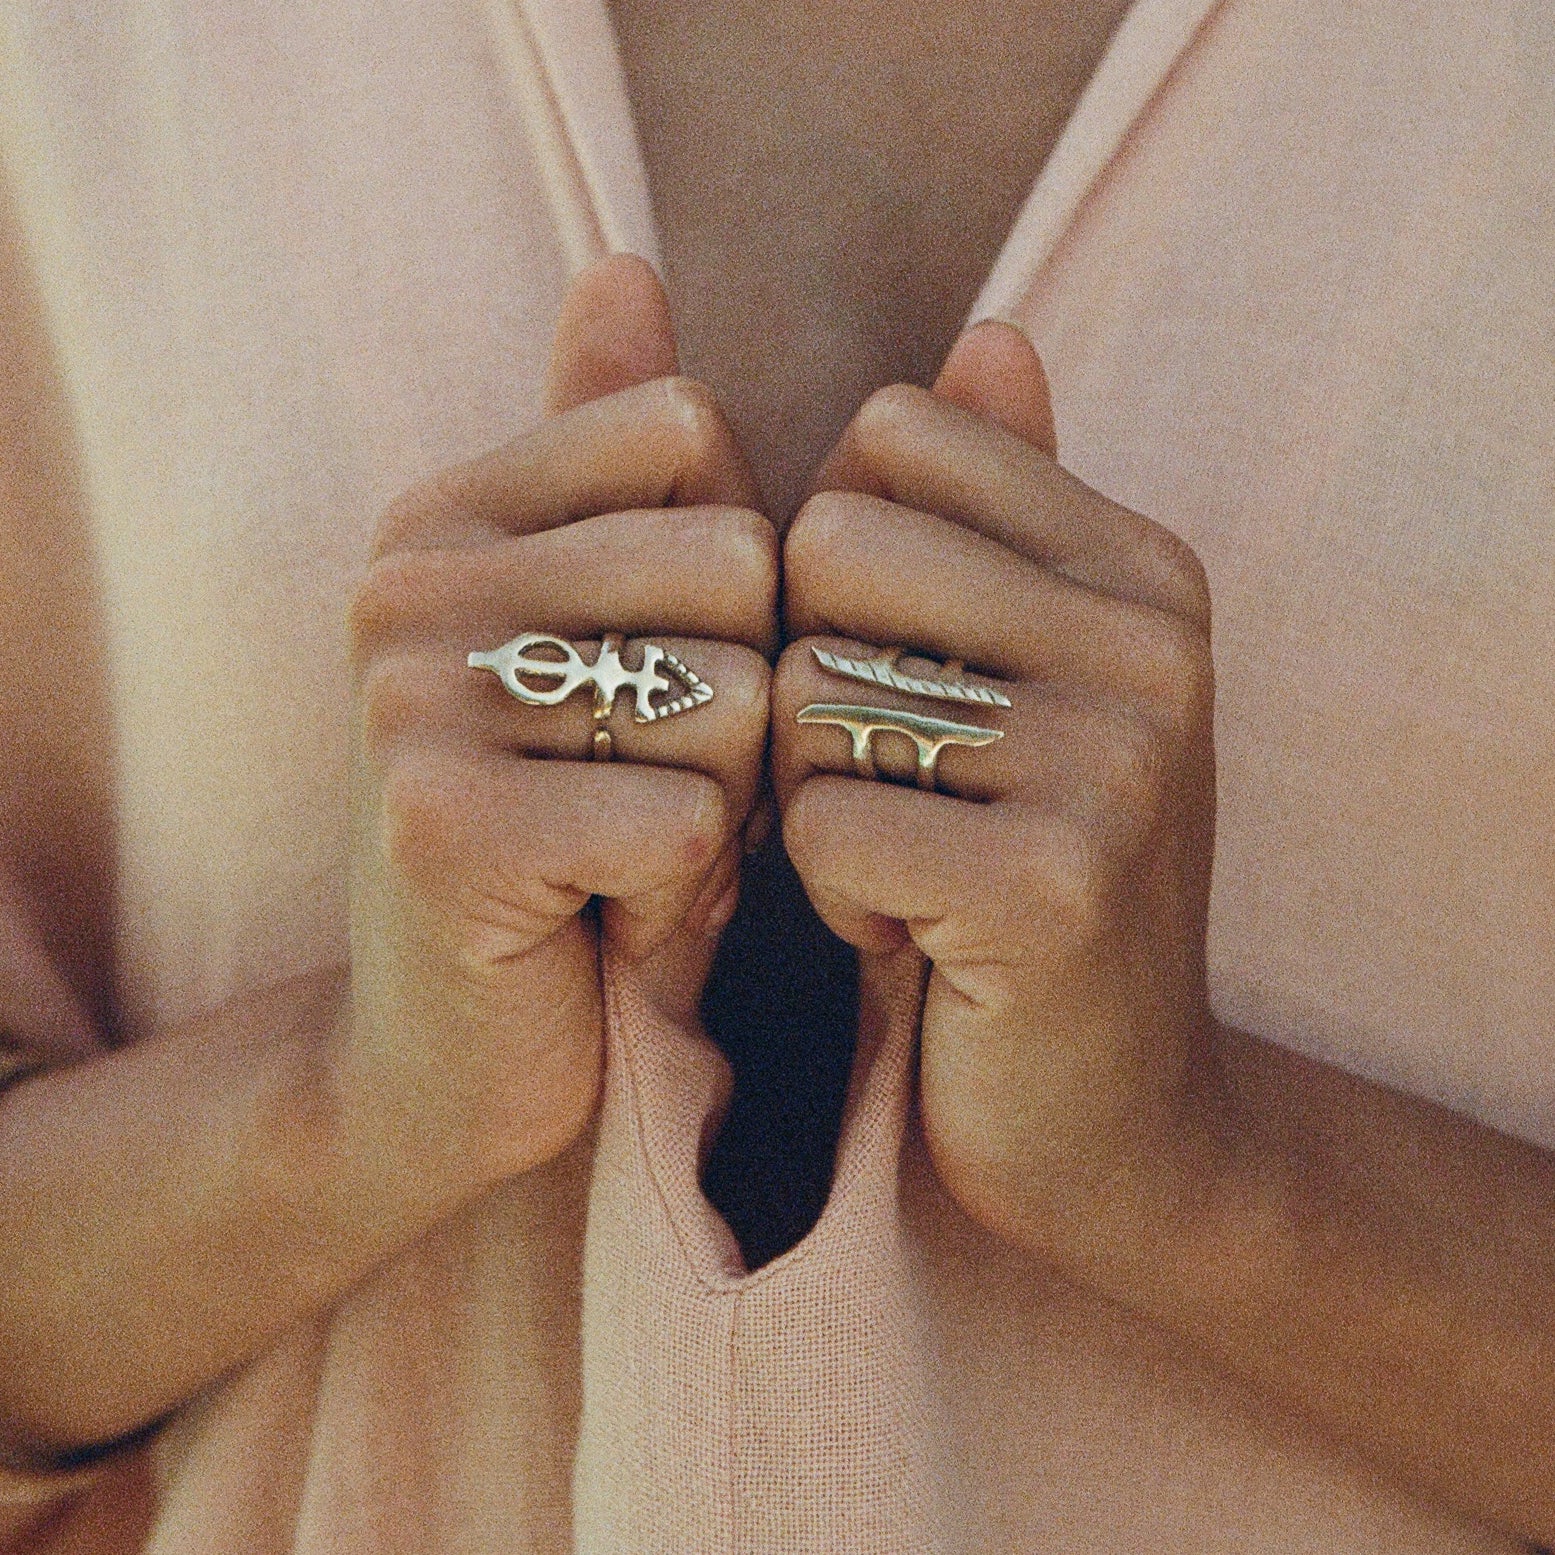 Ma'at Elemental Ring - Ethically Made Jewelry by Catori Life